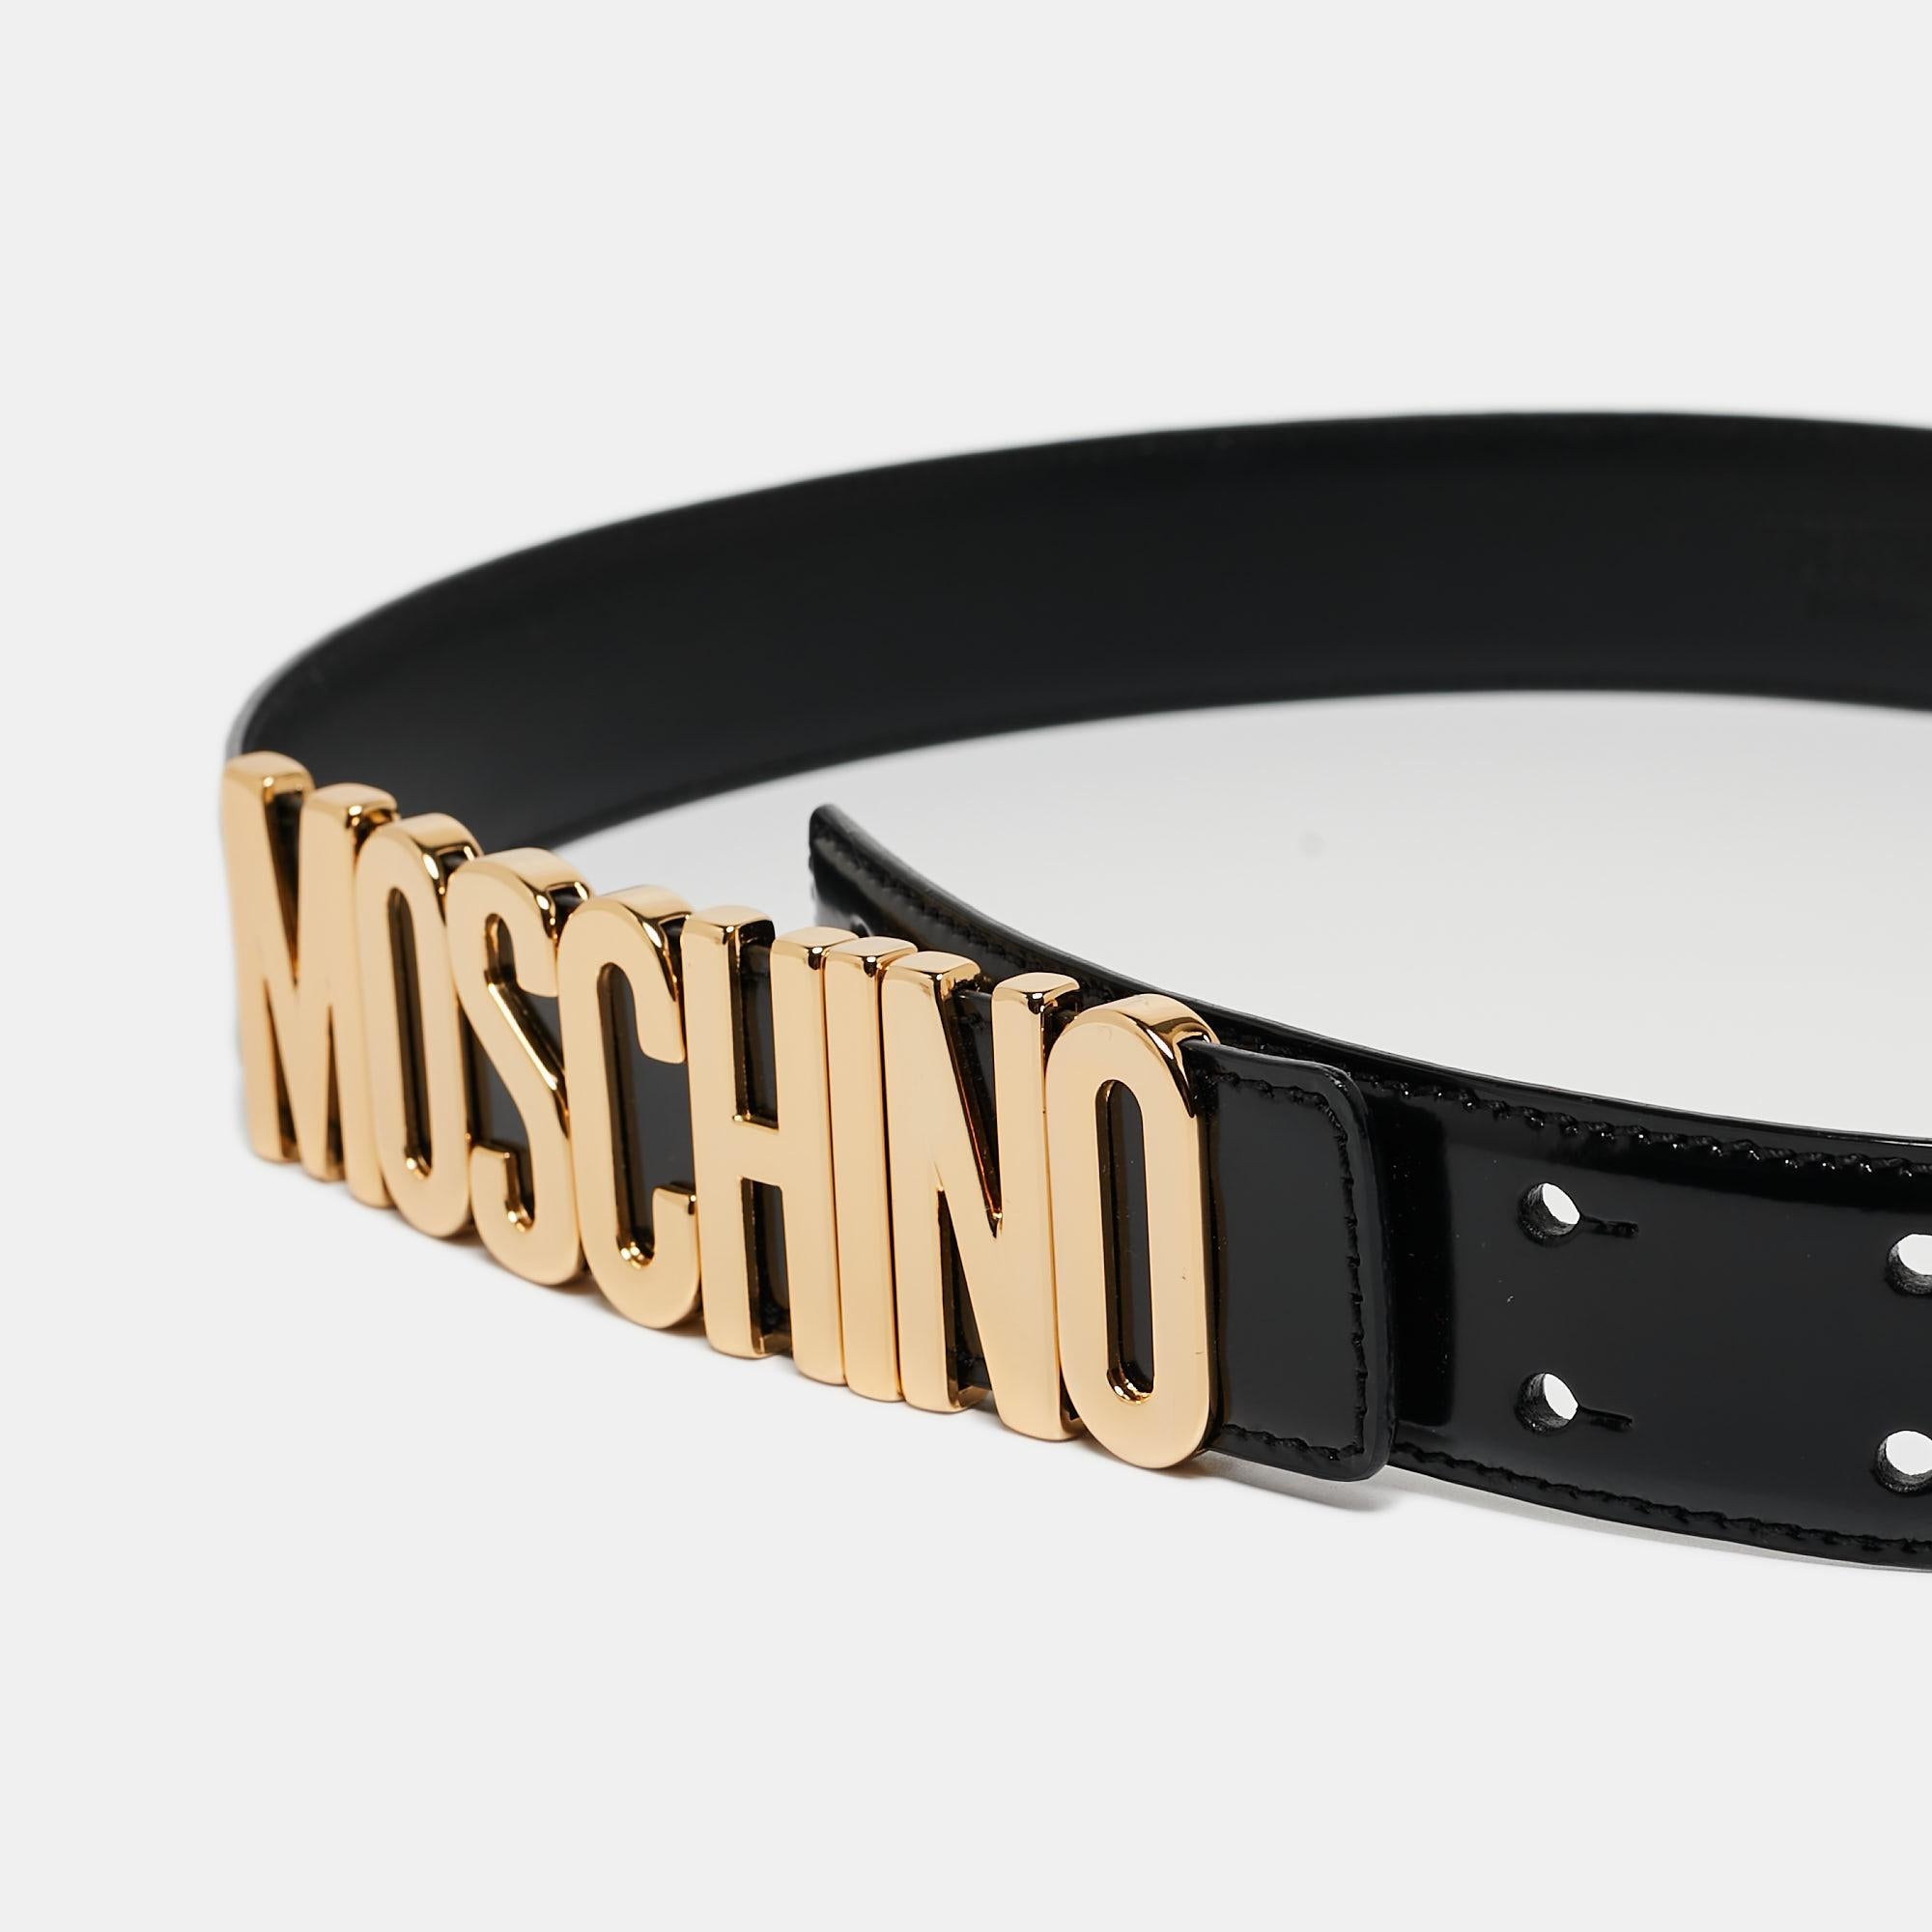 Moschino’s logo belt is crafted from black leather and presents a strong statement. The front is adorned with gold-tone brand lettering giving it a bold look. Style this belt over your dresses, pants, and skirts for a stylish revamp.

Includes: